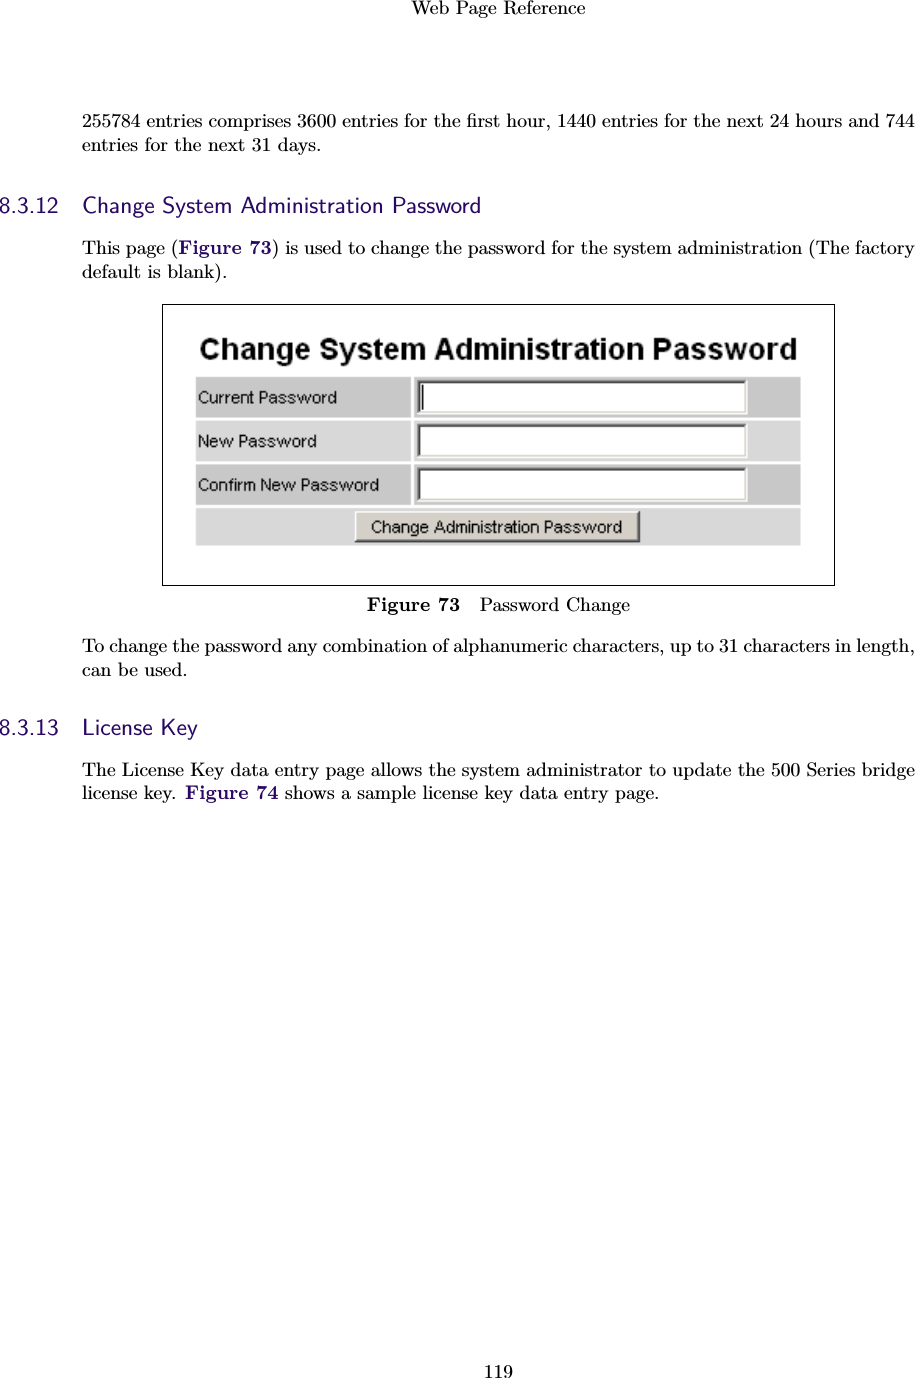 Web Page Reference119255784 entries comprises 3600 entries for the ﬁrst hour, 1440 entries for the next 24 hours and 744entries for the next 31 days.8.3.12 Change System Administration PasswordThis page (Figure 73) is used to change the password for the system administration (The factorydefault is blank).Figure 73 Password ChangeTo change the password any combination of alphanumeric characters, up to 31 characters in length,can be used.8.3.13 License KeyThe License Key data entry page allows the system administrator to update the 500 Series bridgelicense key. Figure 74 shows a sample license key data entry page.